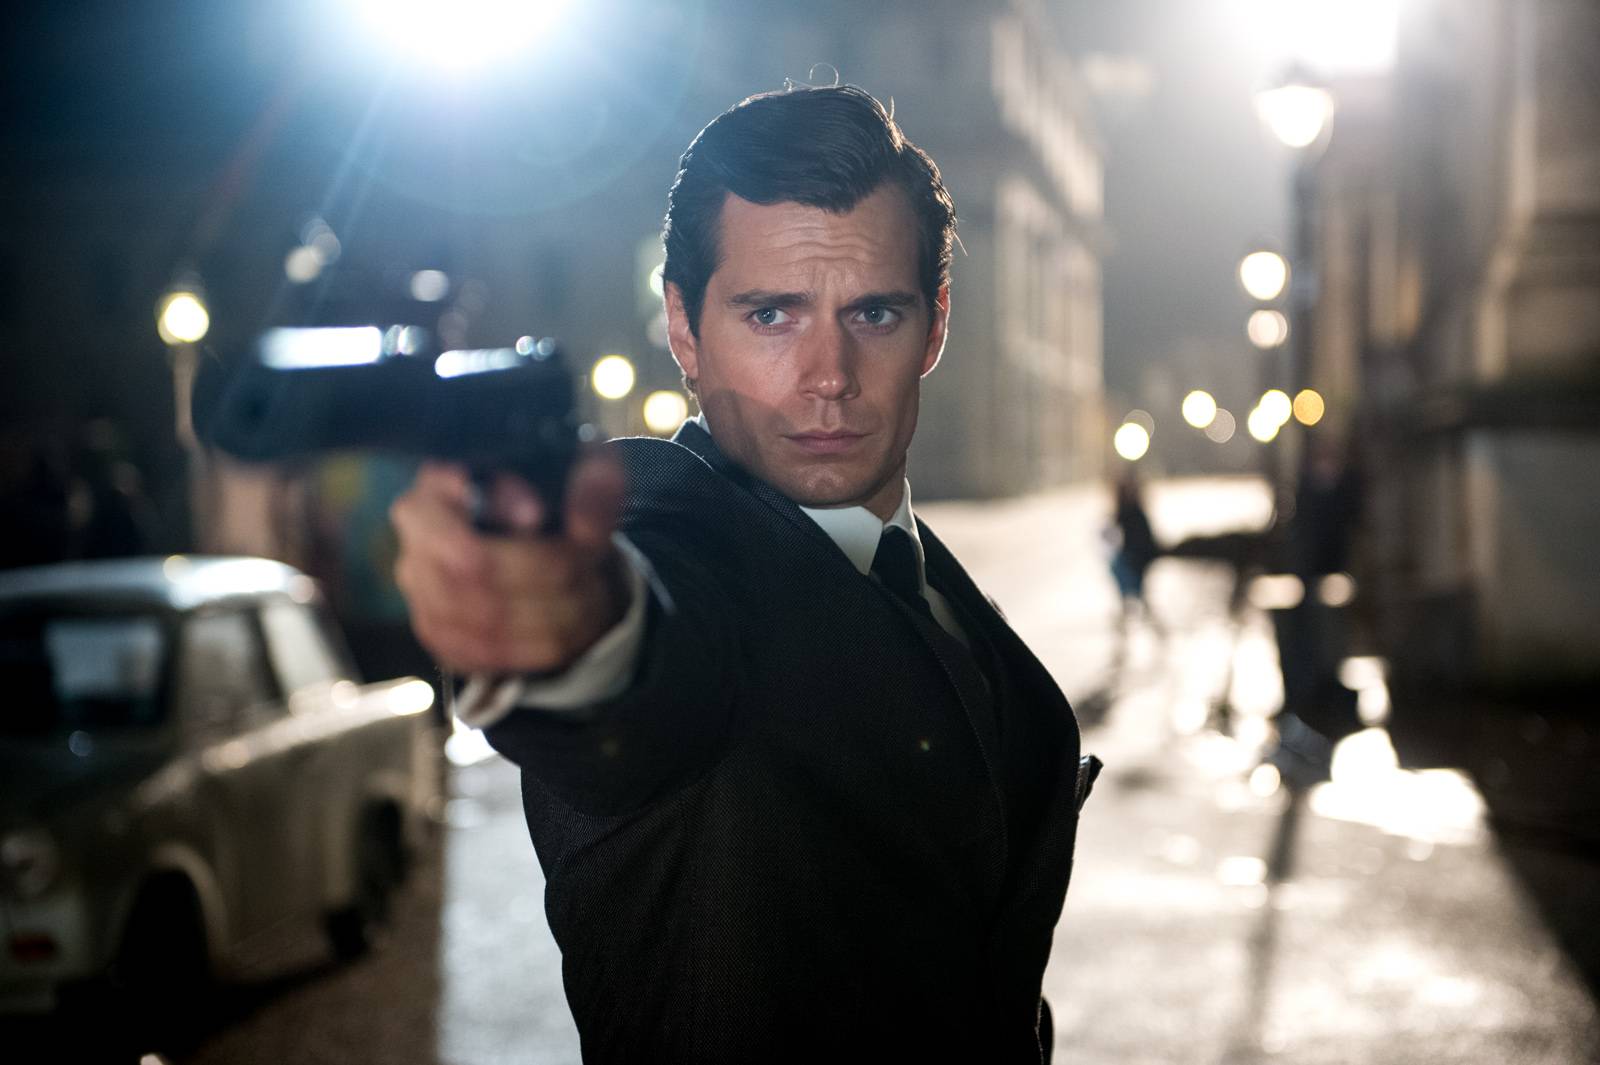 The actor Henry Cavill in The Man From U.N.C.L.E (2015)